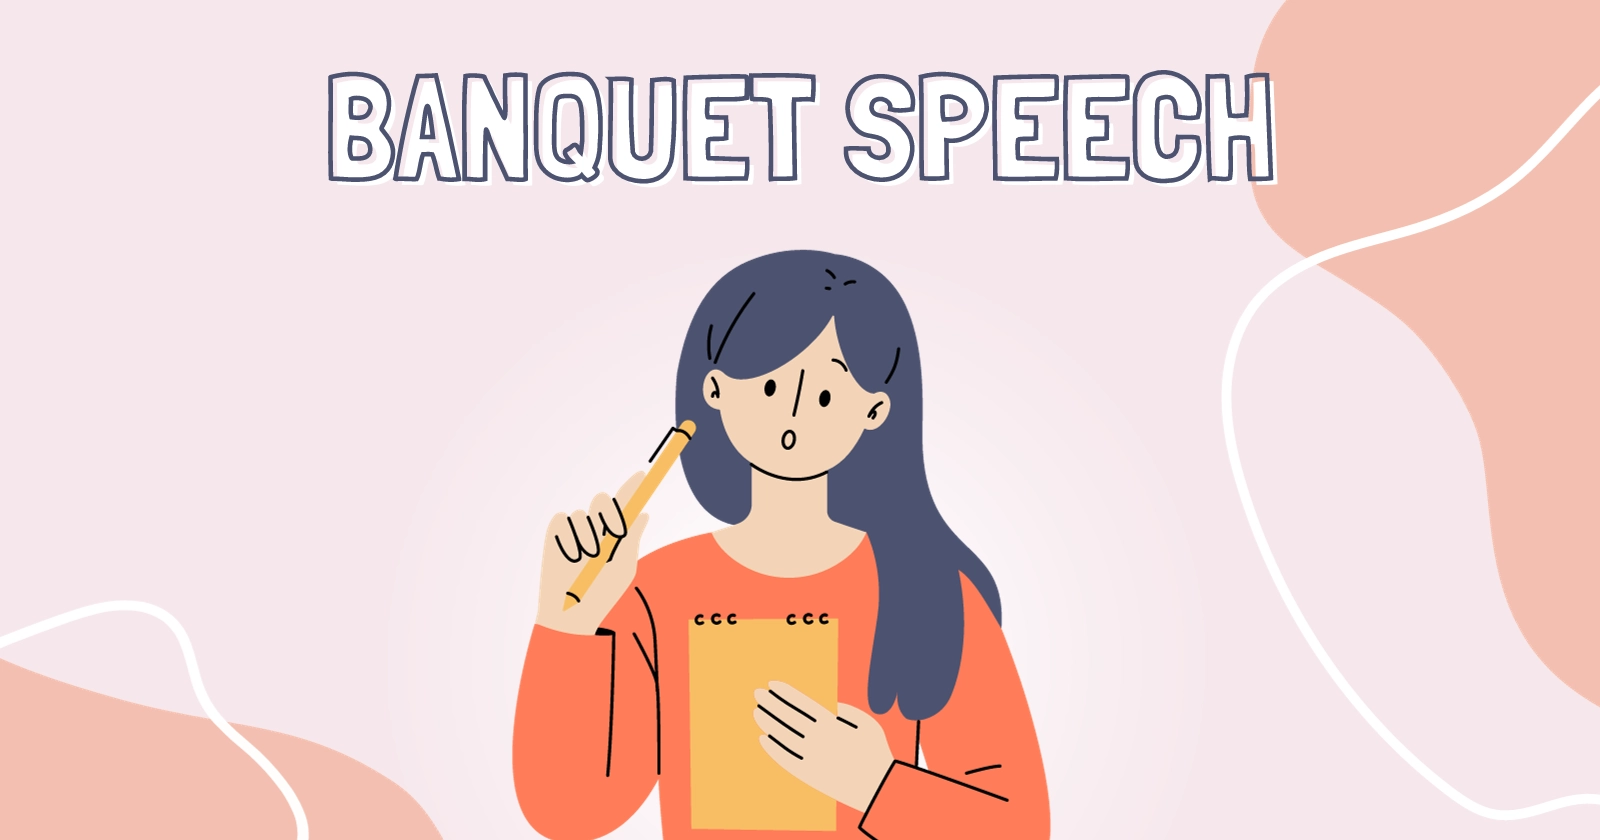 Banquet speeches are a staple of many formal events, from weddings to corporate conferences. But delivering a great banquet speech can be daunting. After all, you want to say something meaningful and memorable, but you also don't want to bore your audience.